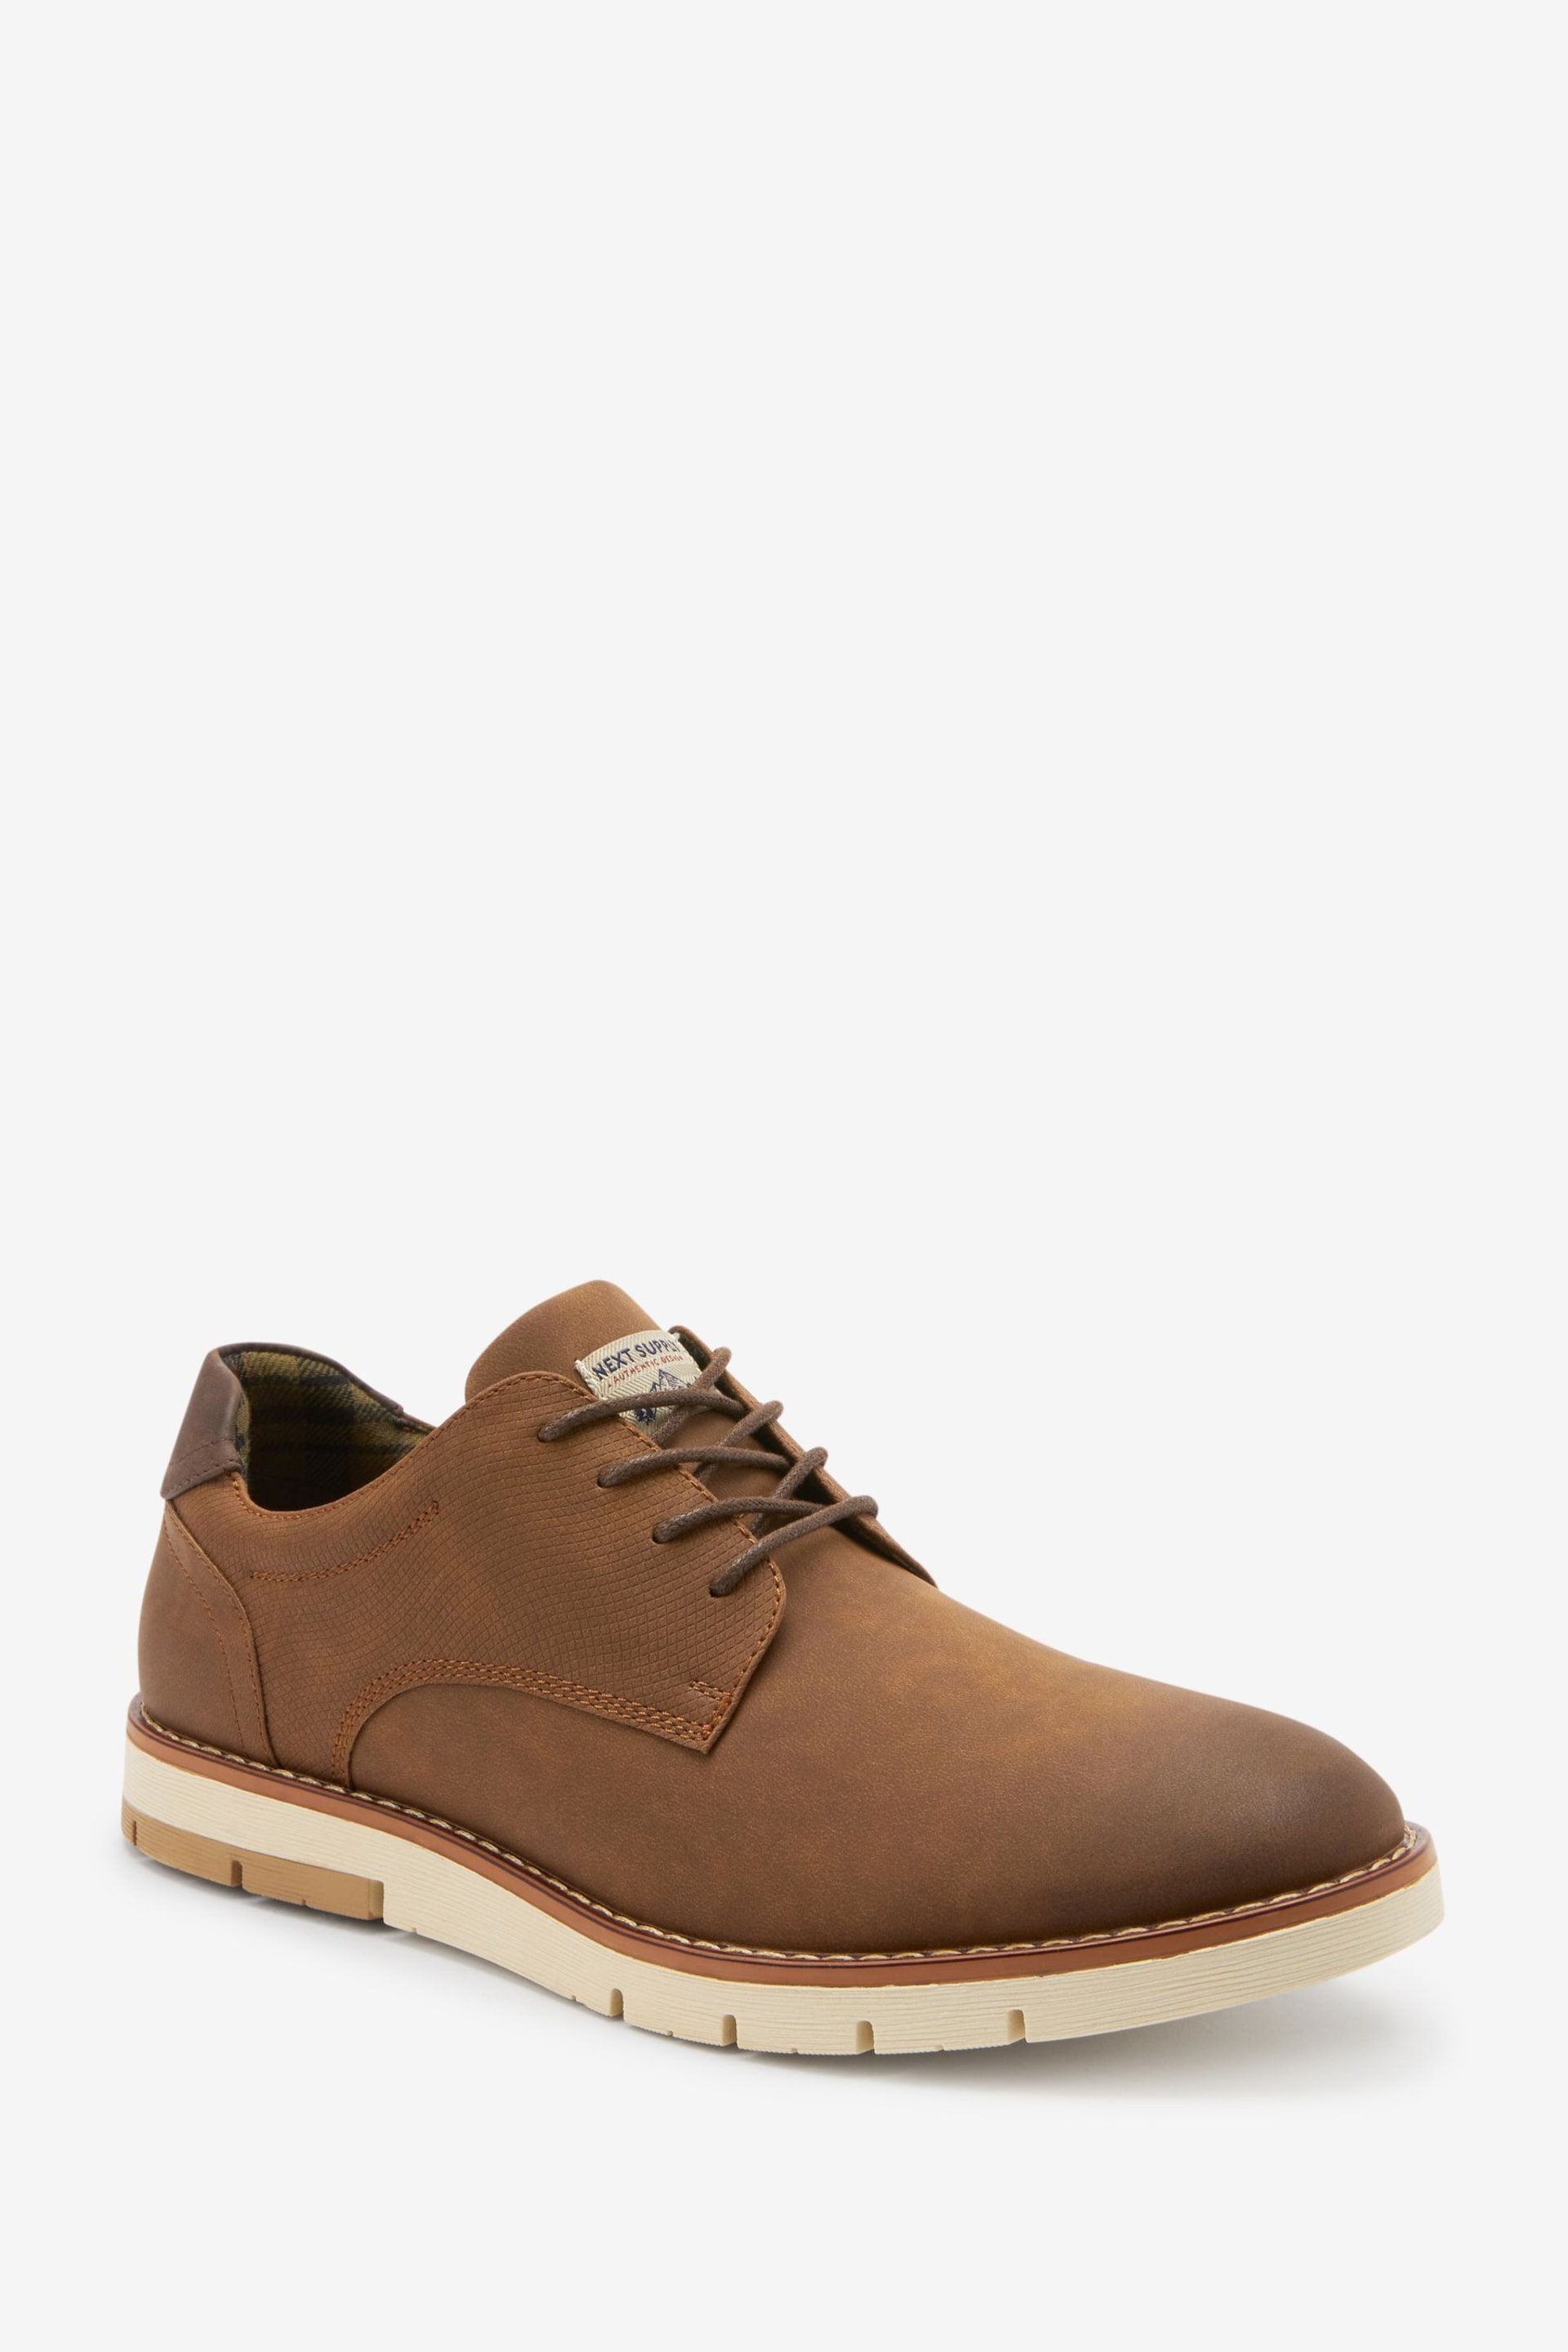 Tan Brown Sports Wedges Shoes - Image 2 of 4